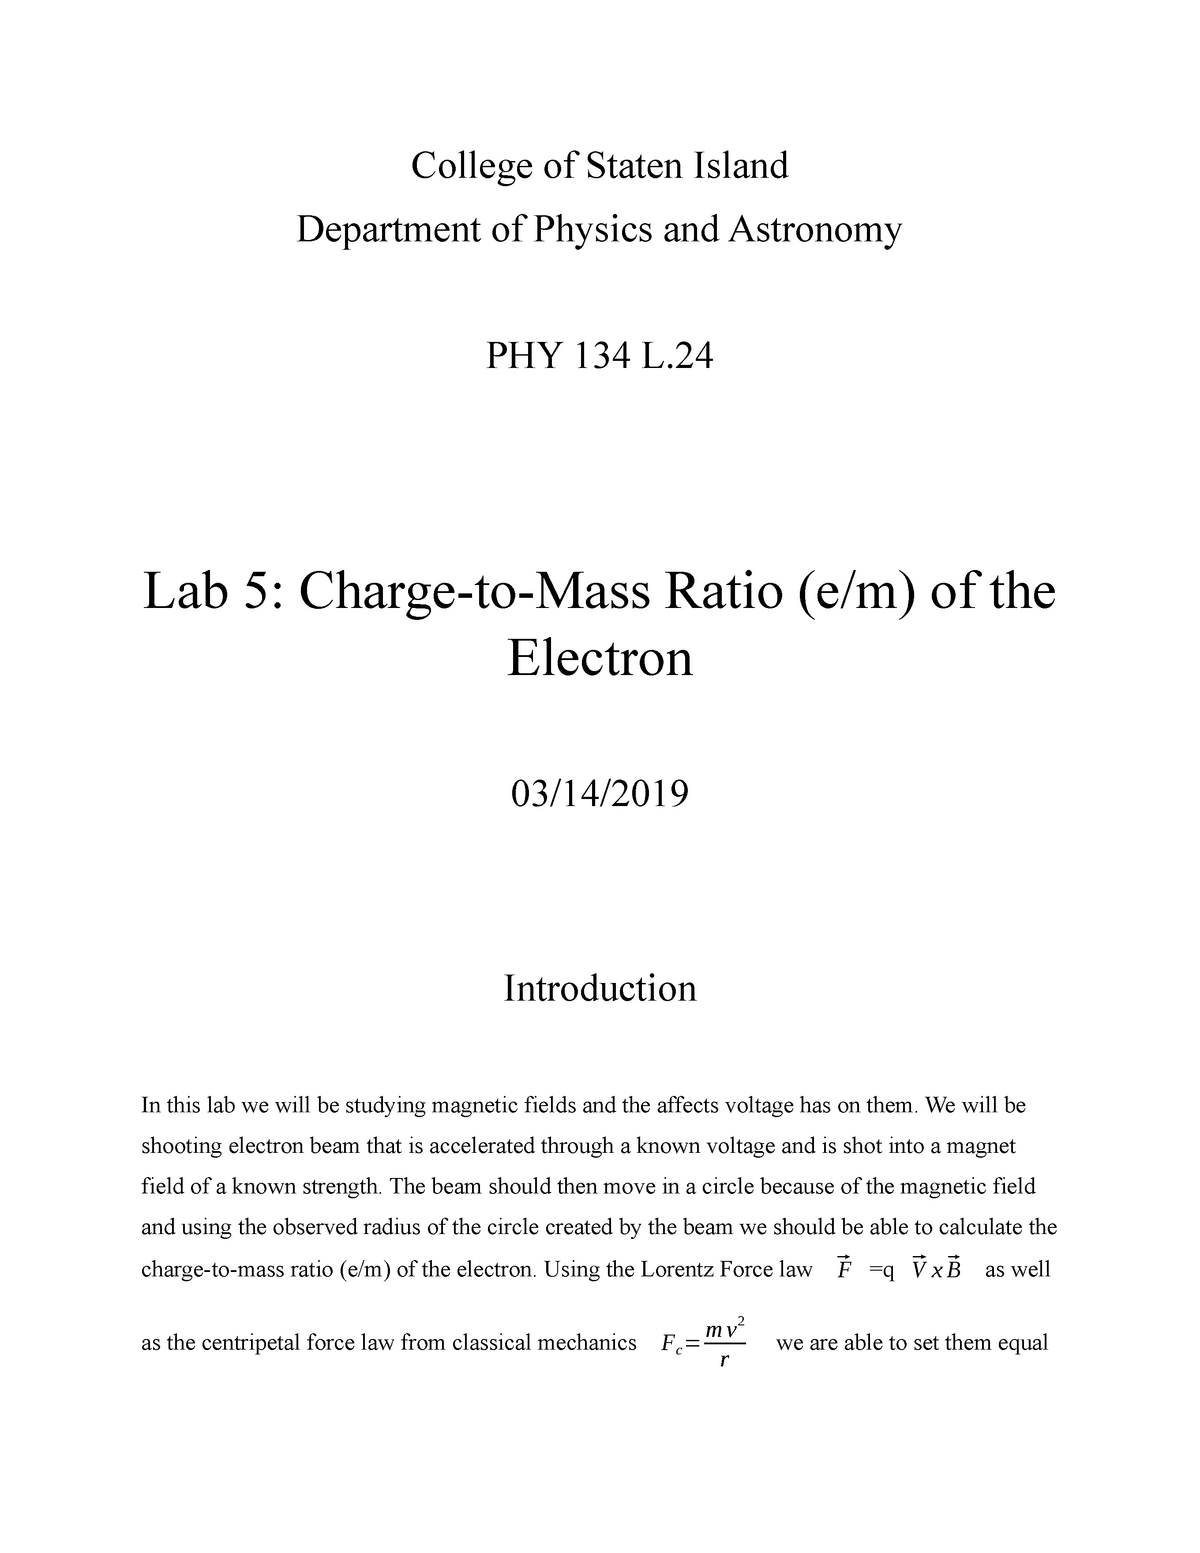 Phy 134 lab 5 charge to mass ratio of electron lab 5 College of